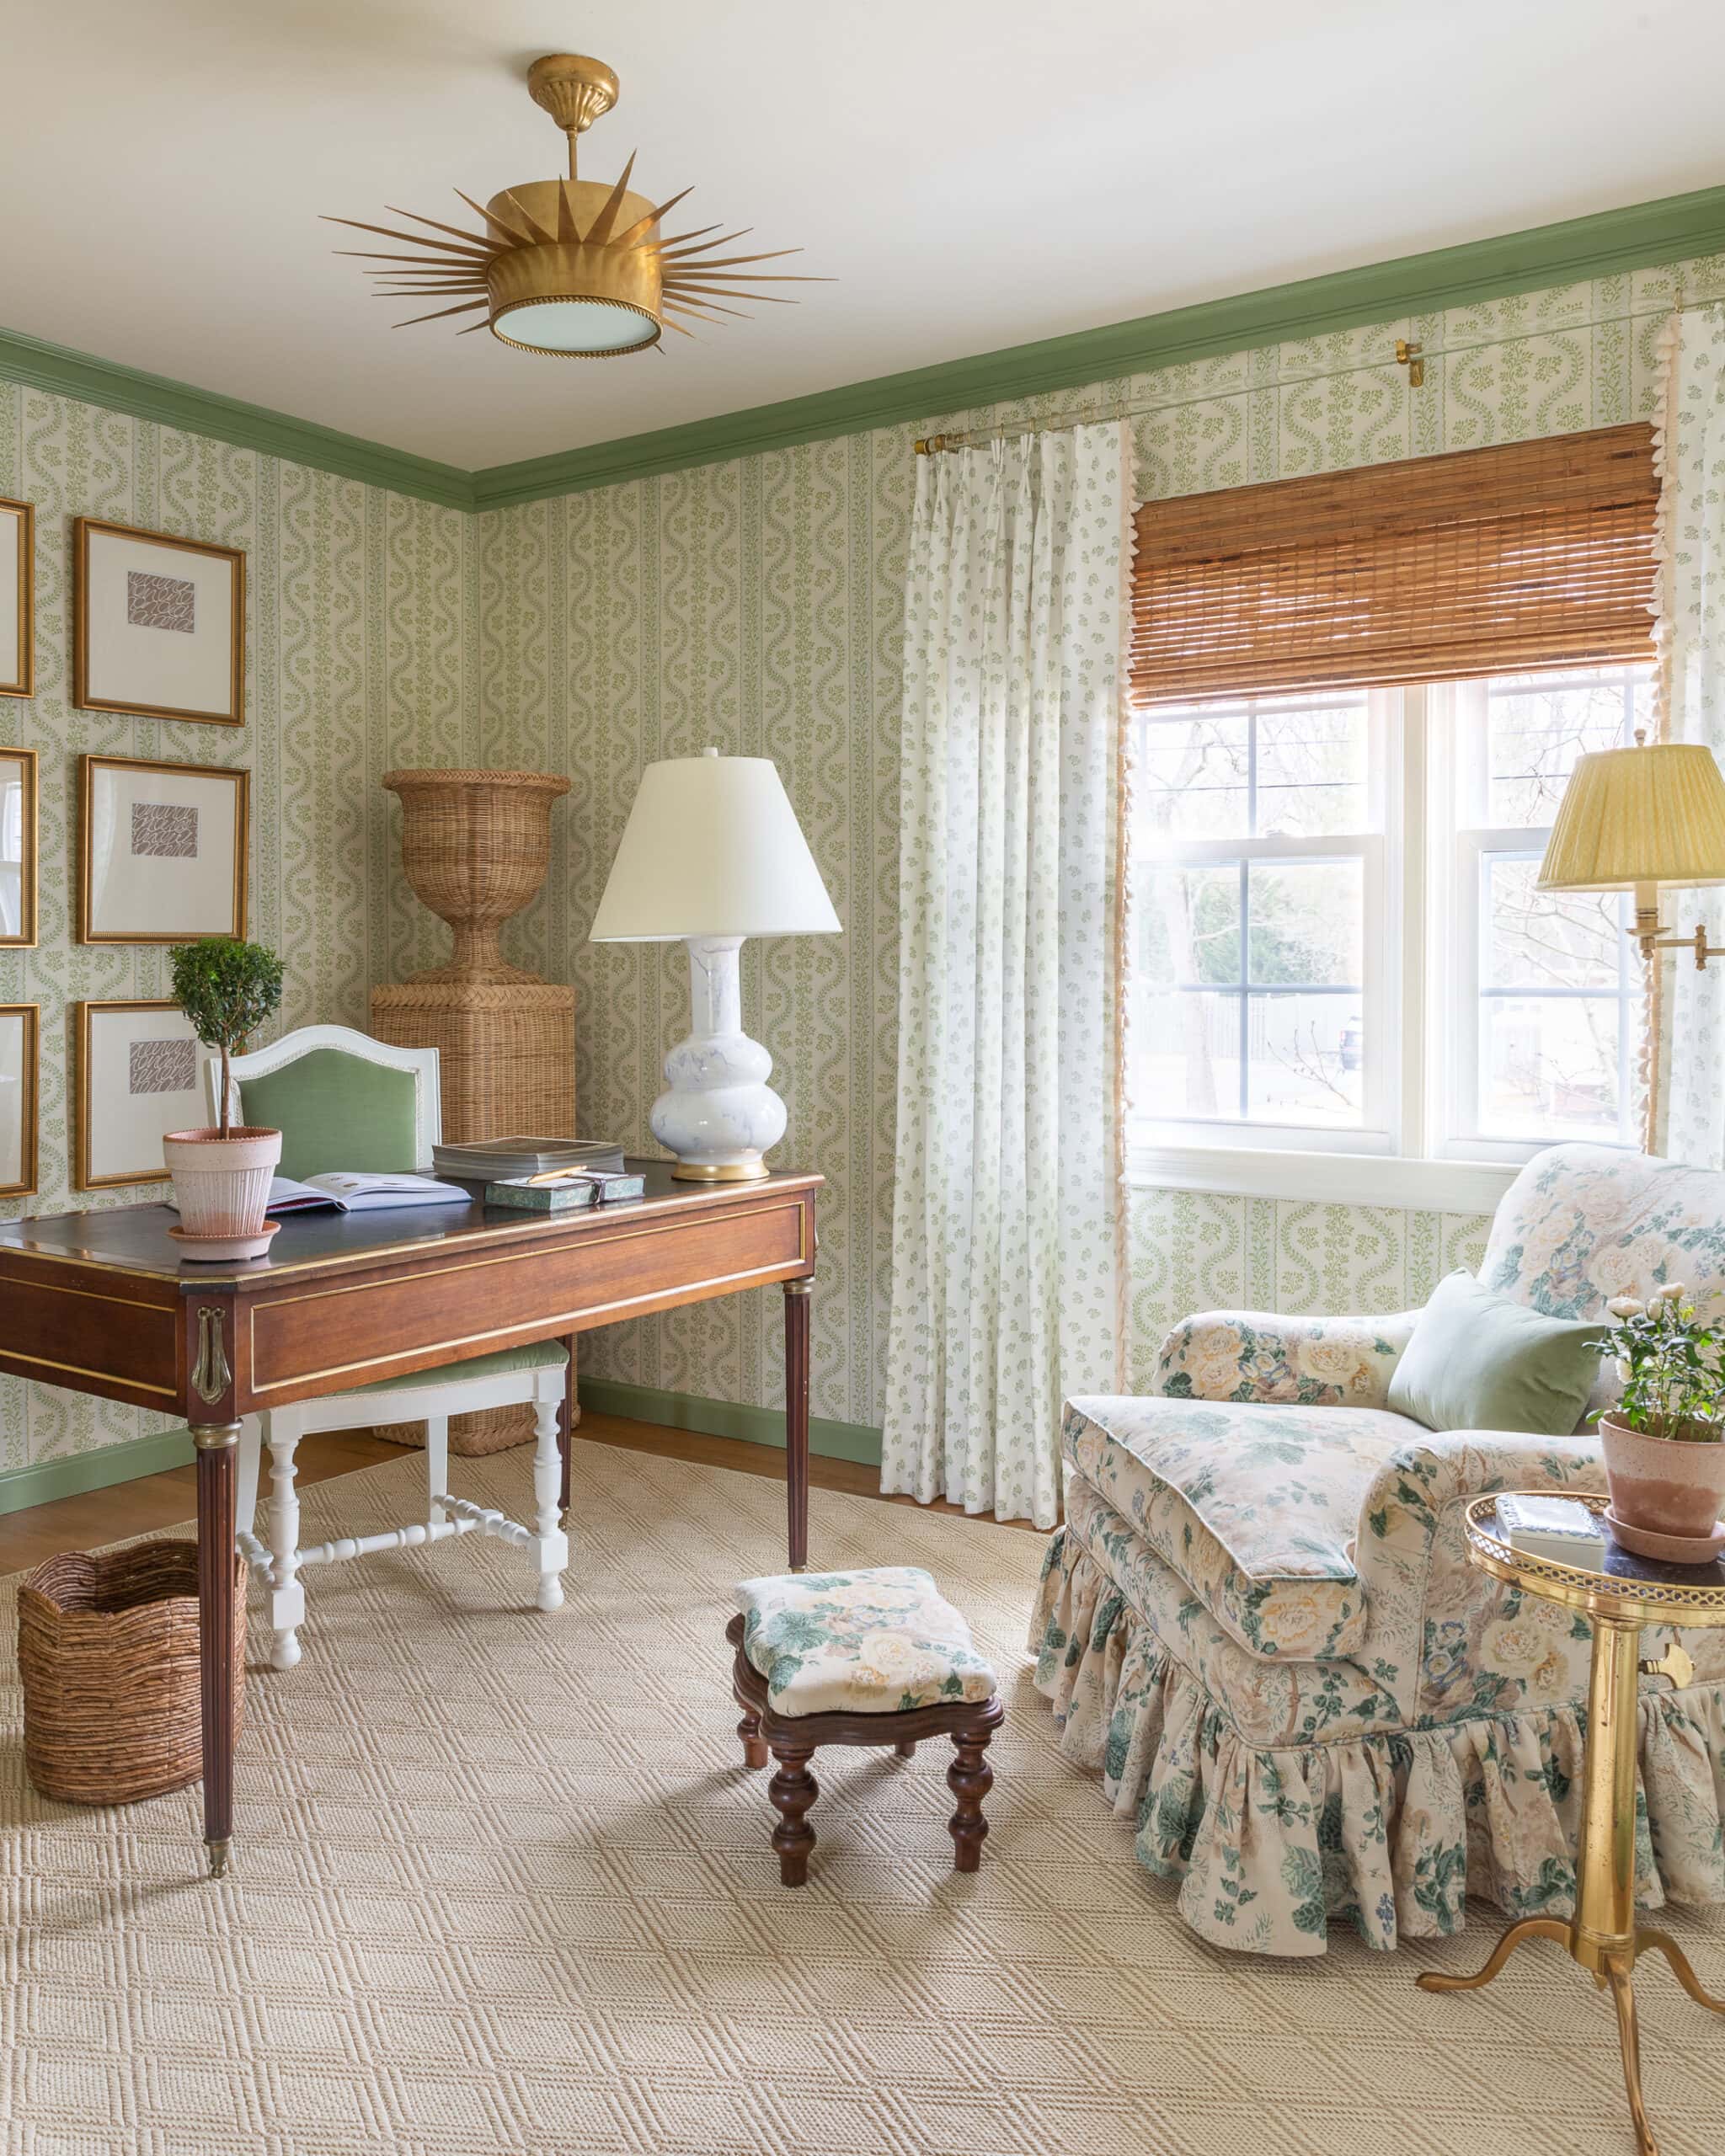 grandmillennial-style-office-bedroom-traditional-design-inspiration-layered-patterns